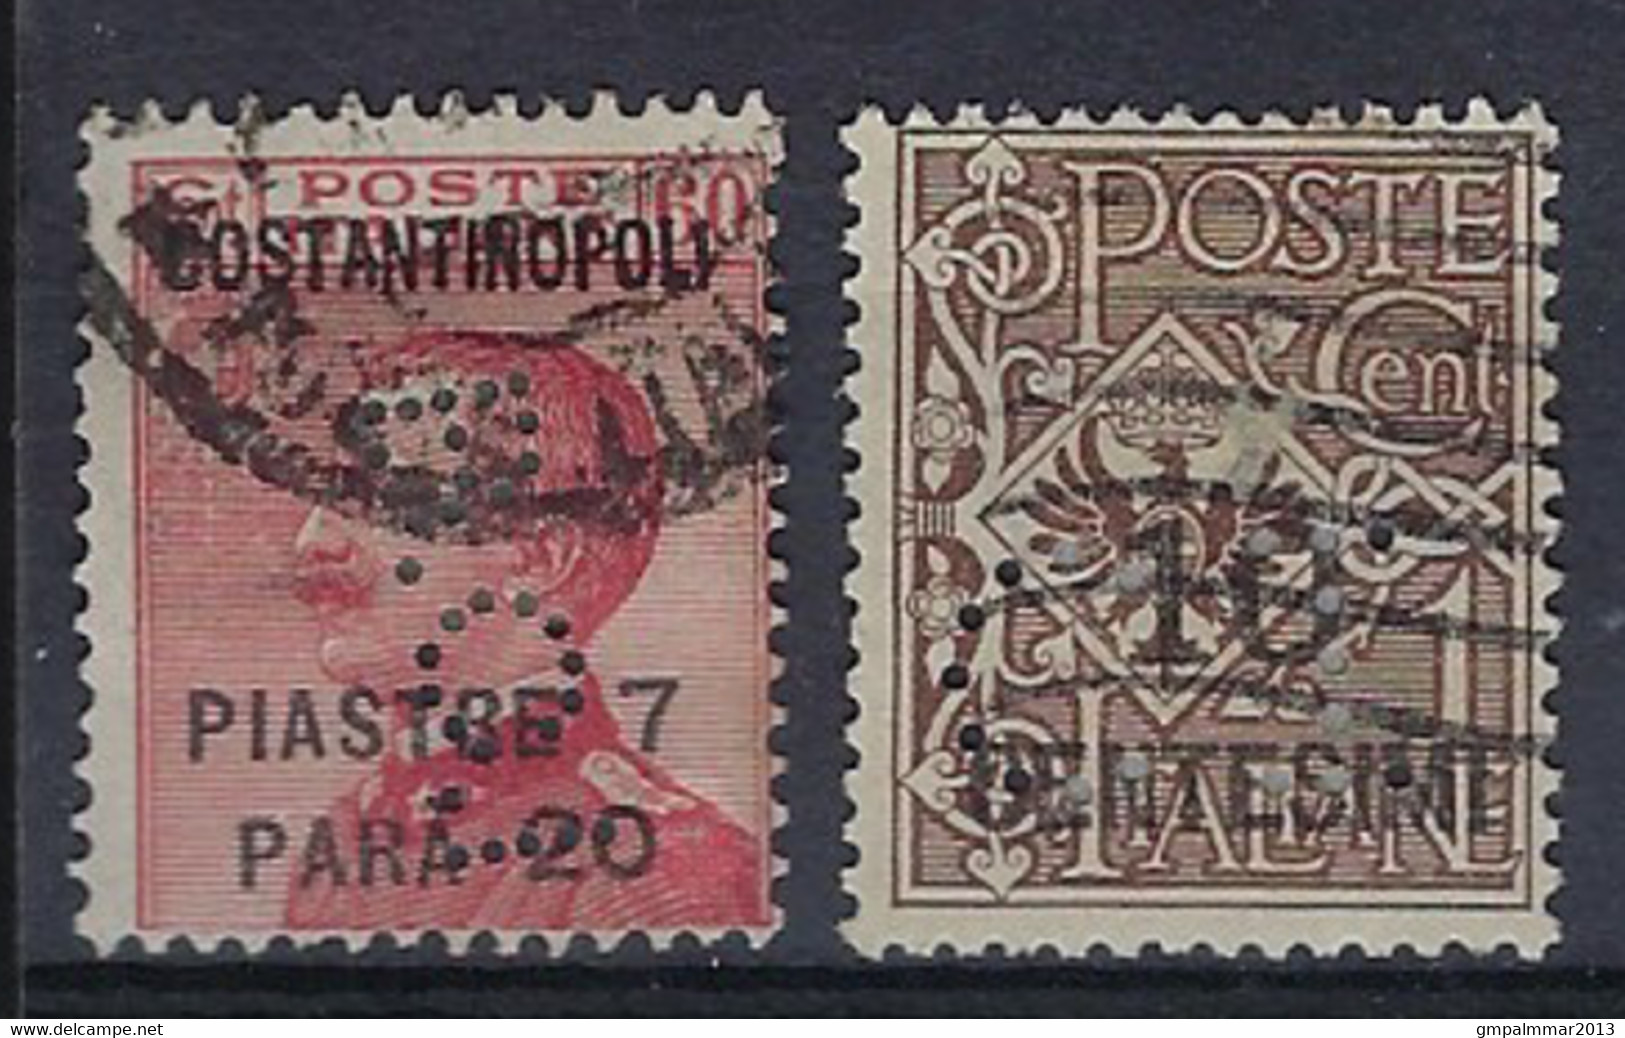 PERFIN / PERFO / LOCHUNG 2 Stamps , 1 X LEVANT / LEVANTE  ITALY OFFICE CONSTANTINOPOLI  ; 2 Scans ! LOT 207 - Unclassified